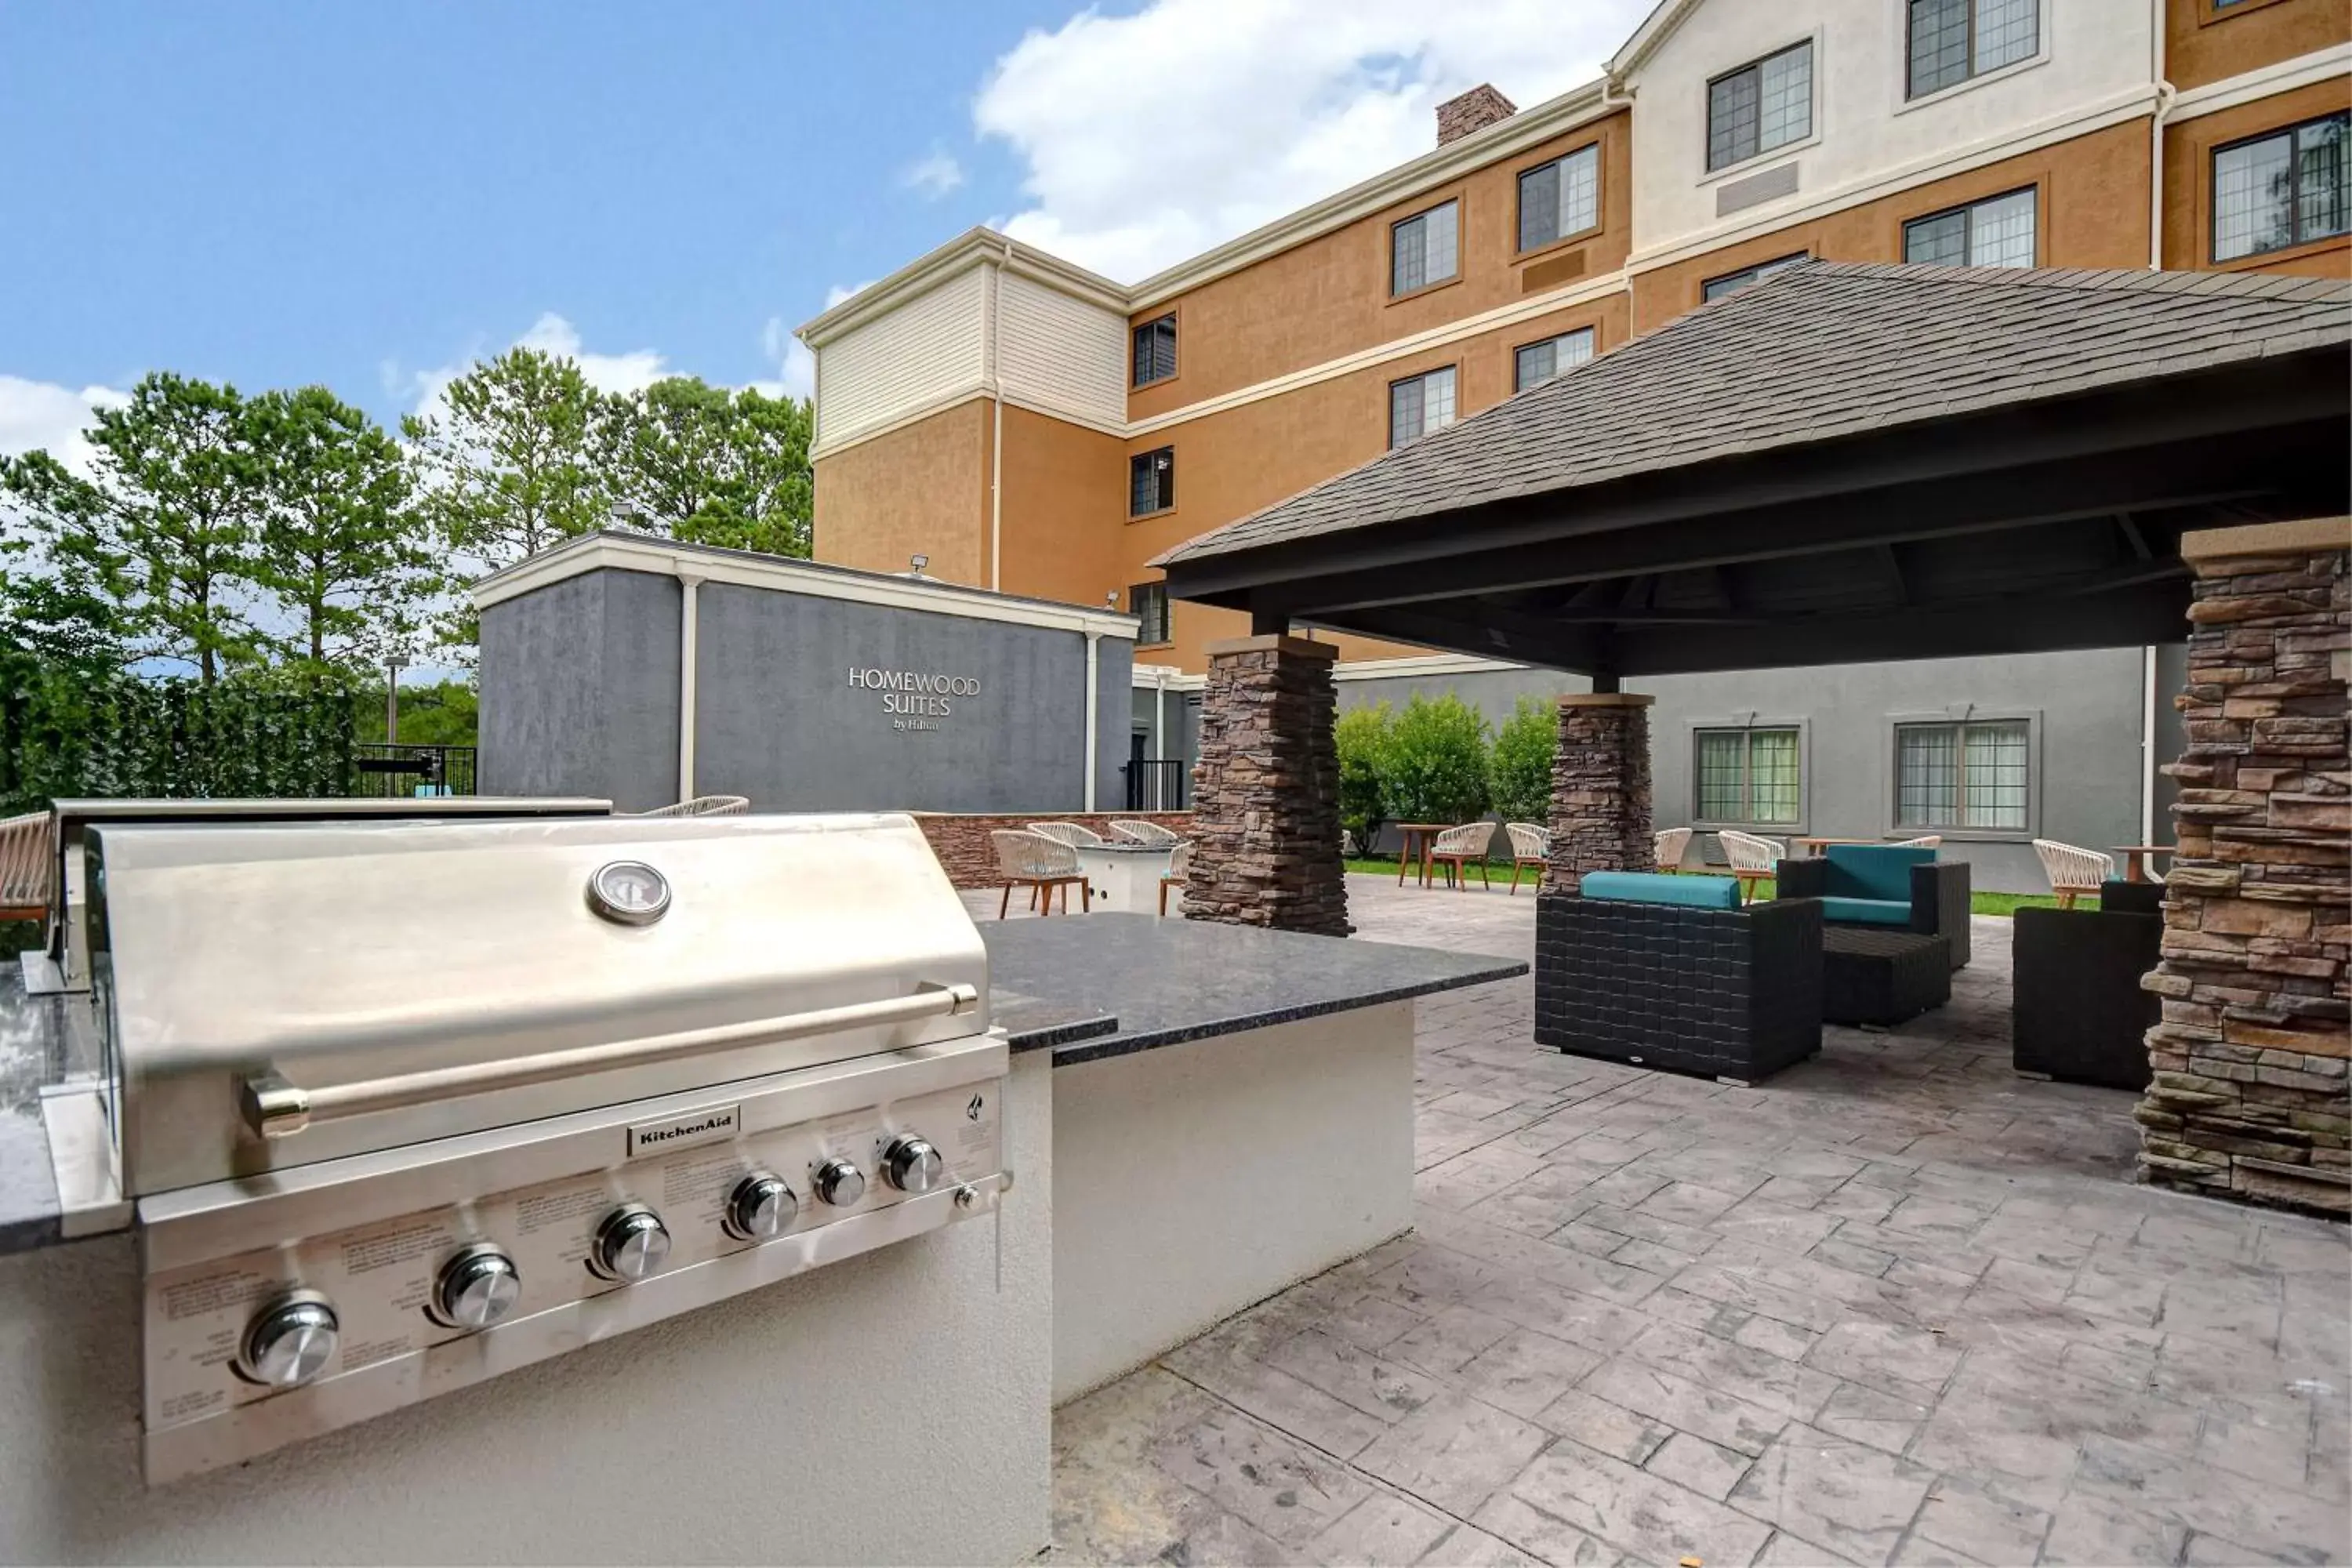 Property building, BBQ Facilities in Homewood Suites Newport News - Yorktown by Hilton